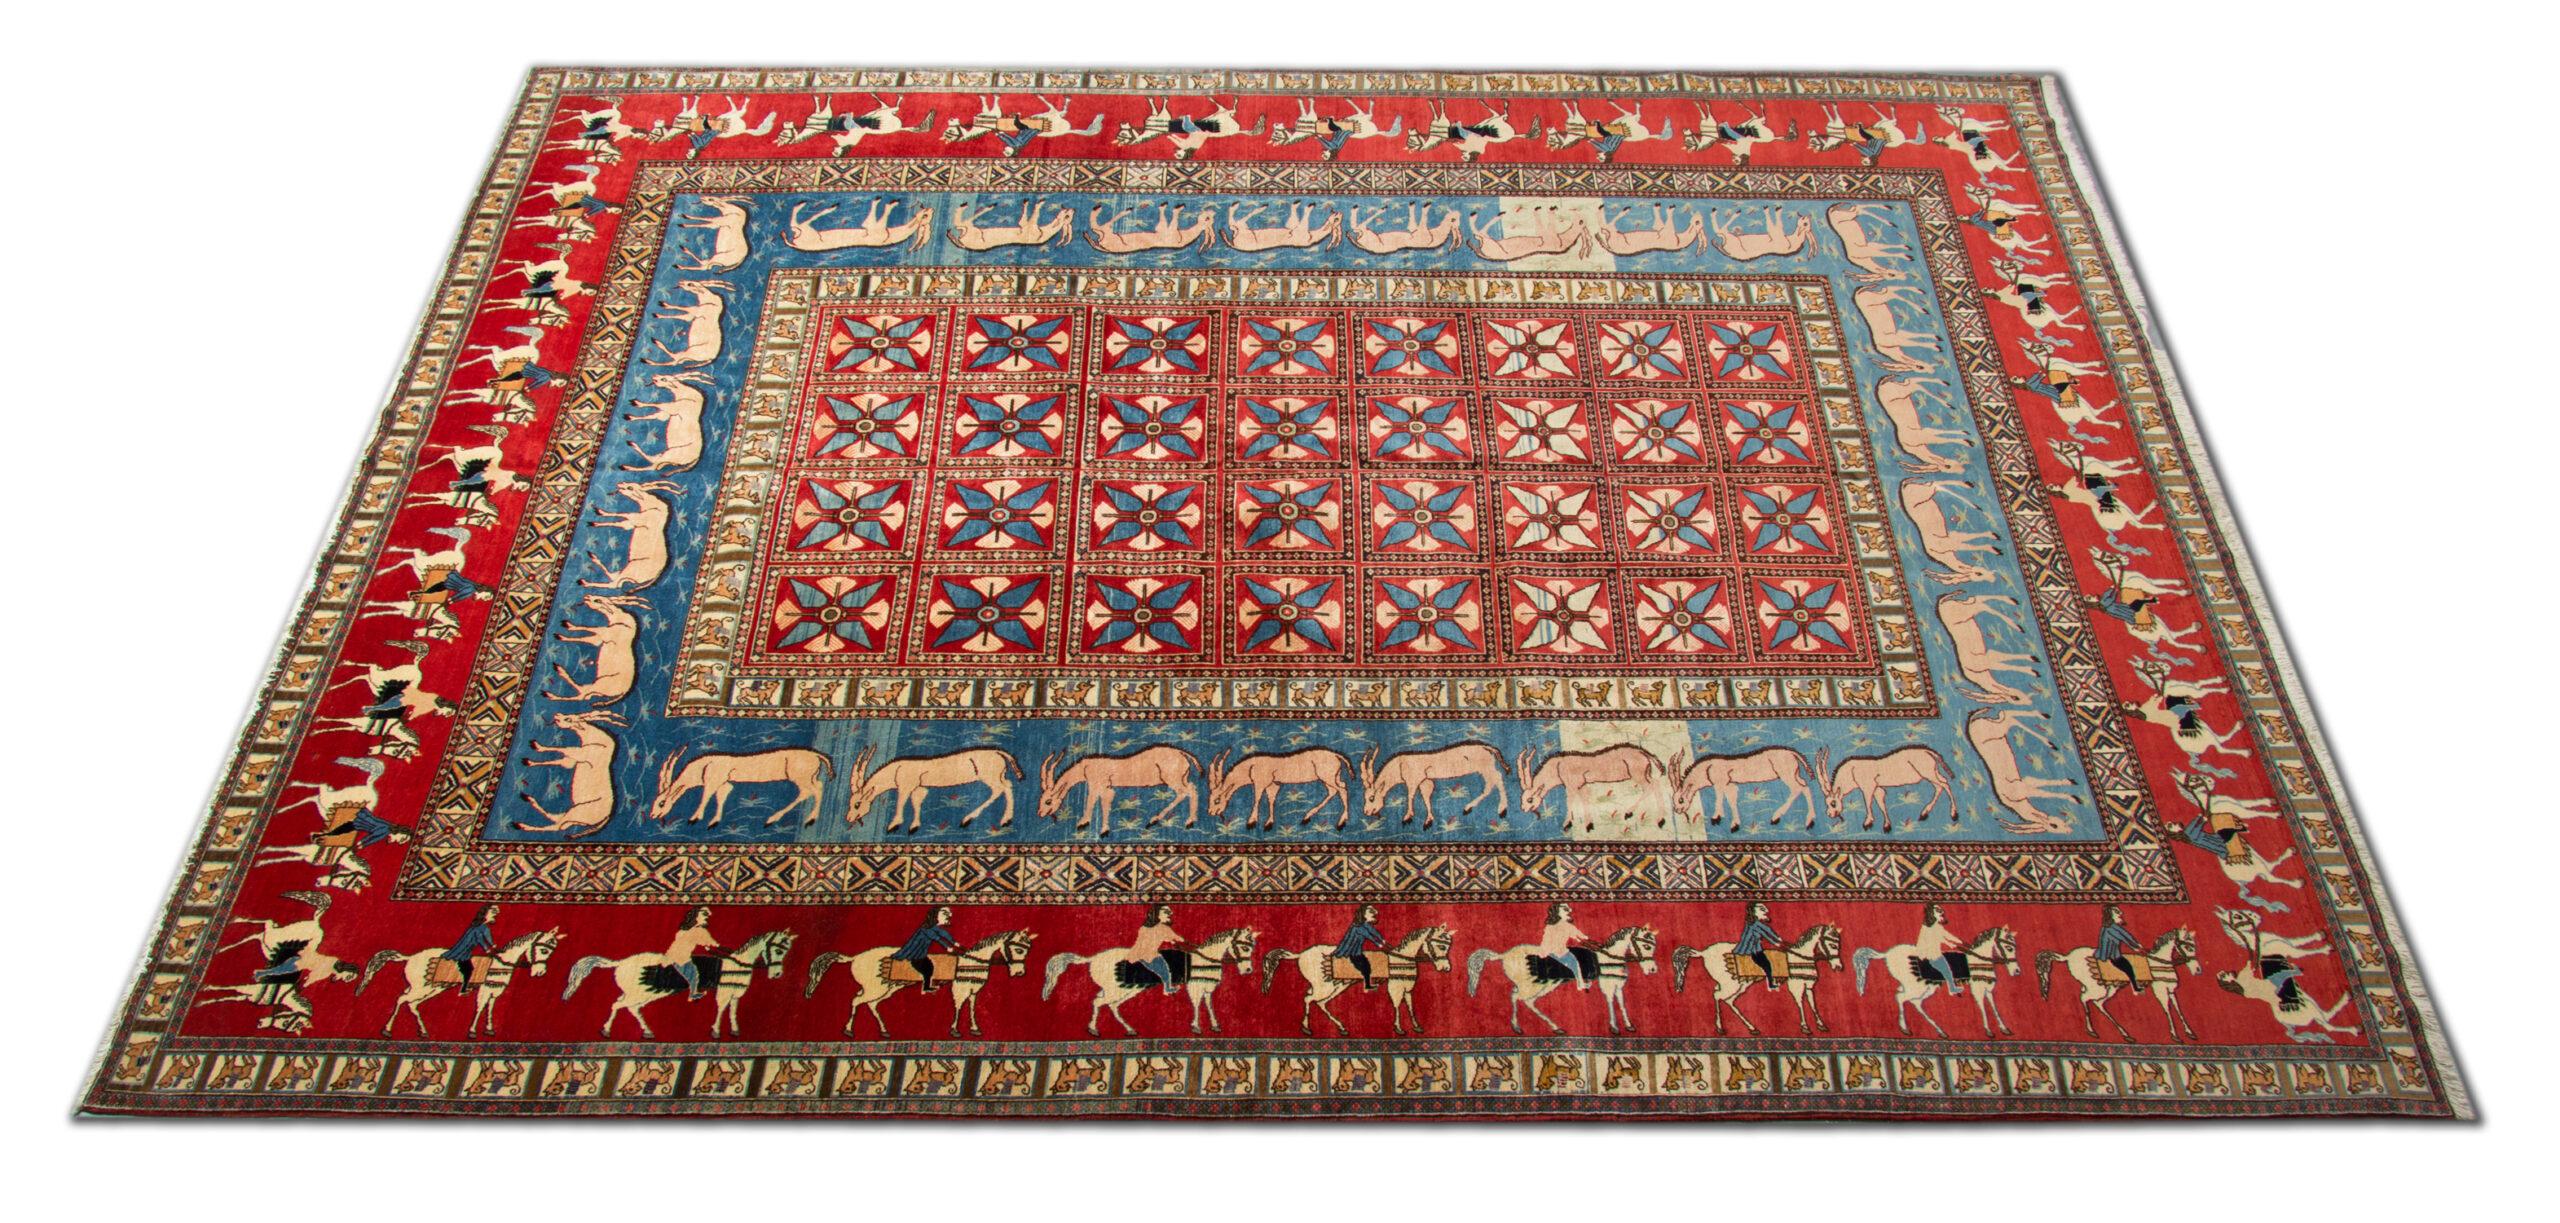 This Collectibles Persian Semnan Carpet is rare due to its unique design and colouring. The design features a unique layered repeat pattern border with realistically woven horses and riders on a red background, followed by Rams on a blue background.